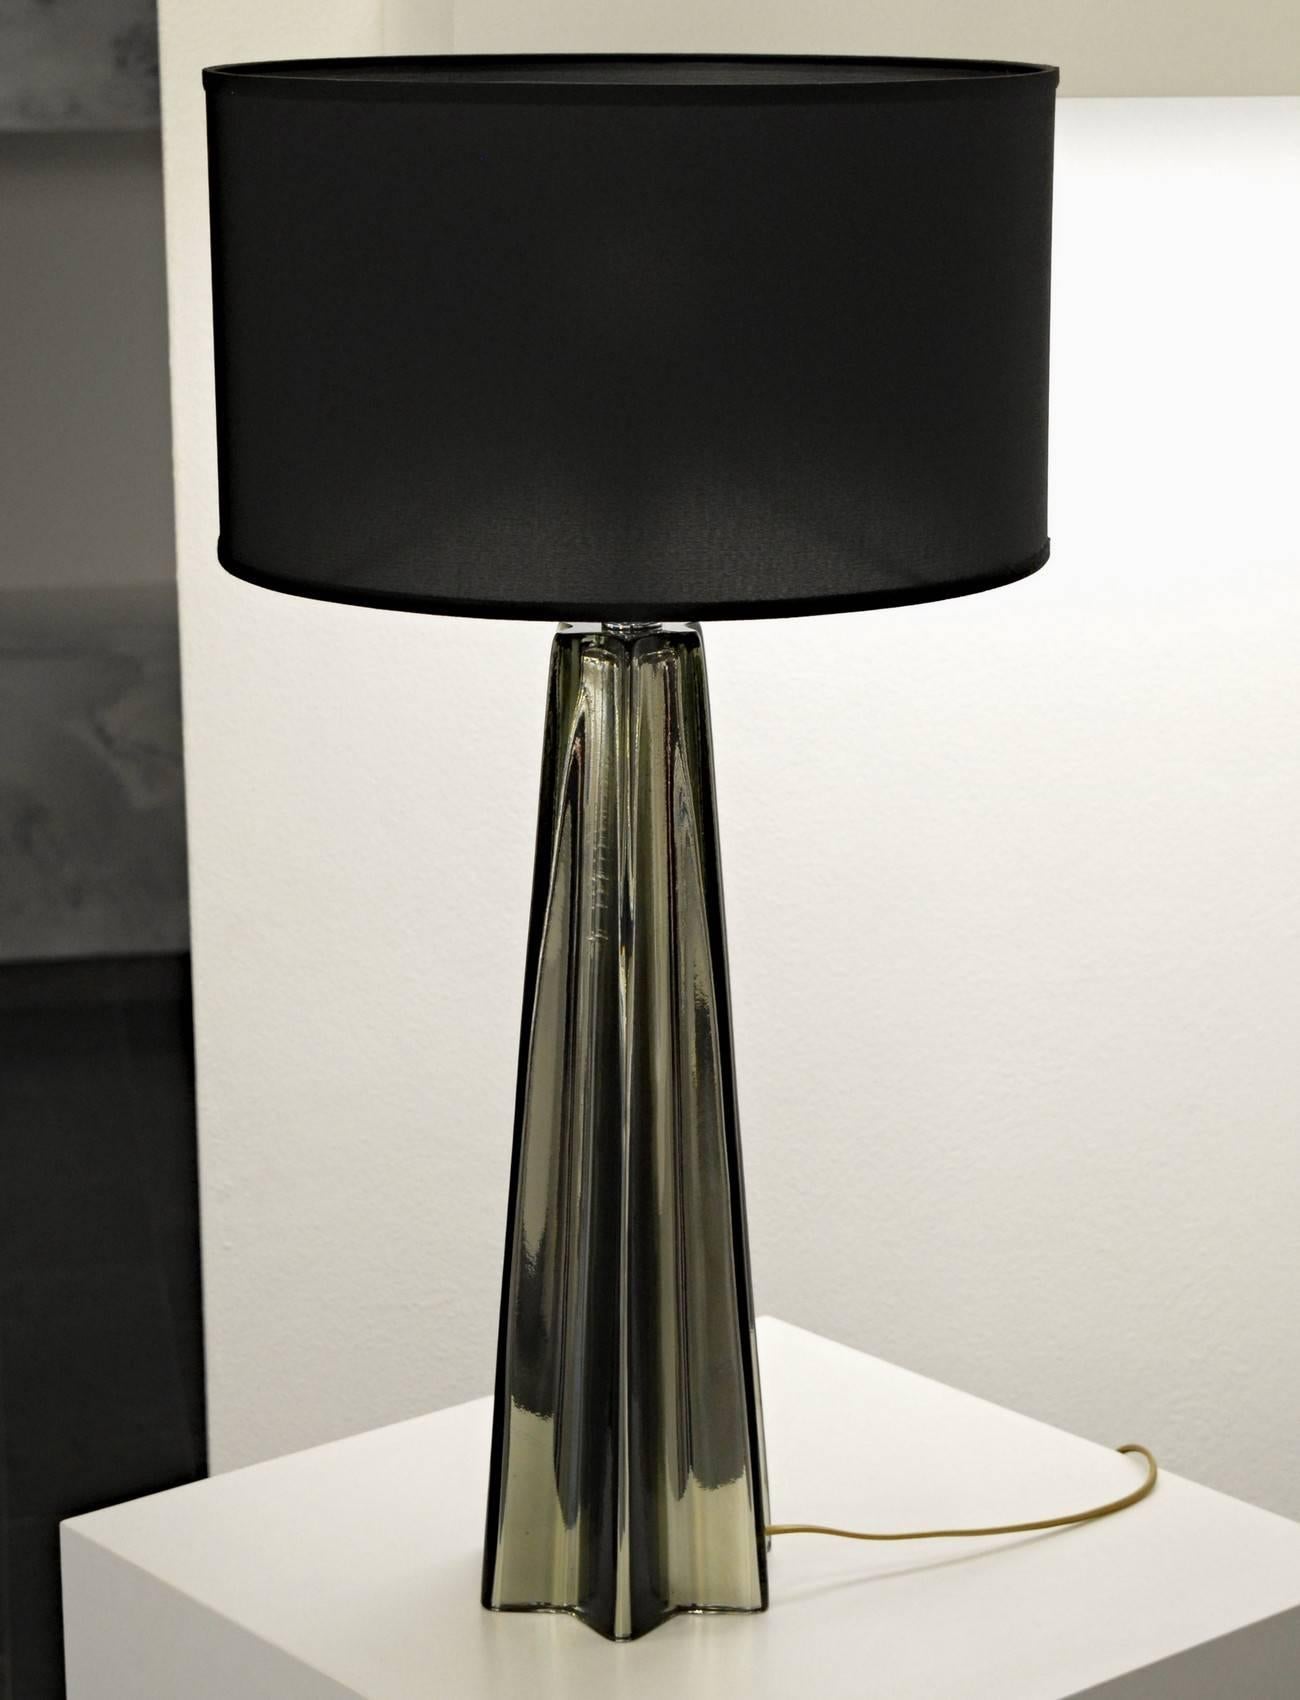 Pair of tall table lamp attributed to Alberto Donà in Murano. Gray acciaio color layered inside with mirror mercury glass technique. Geometry of shape plays well with light reflection making a wonderful effect when the shaded lamp is lit. A stylish